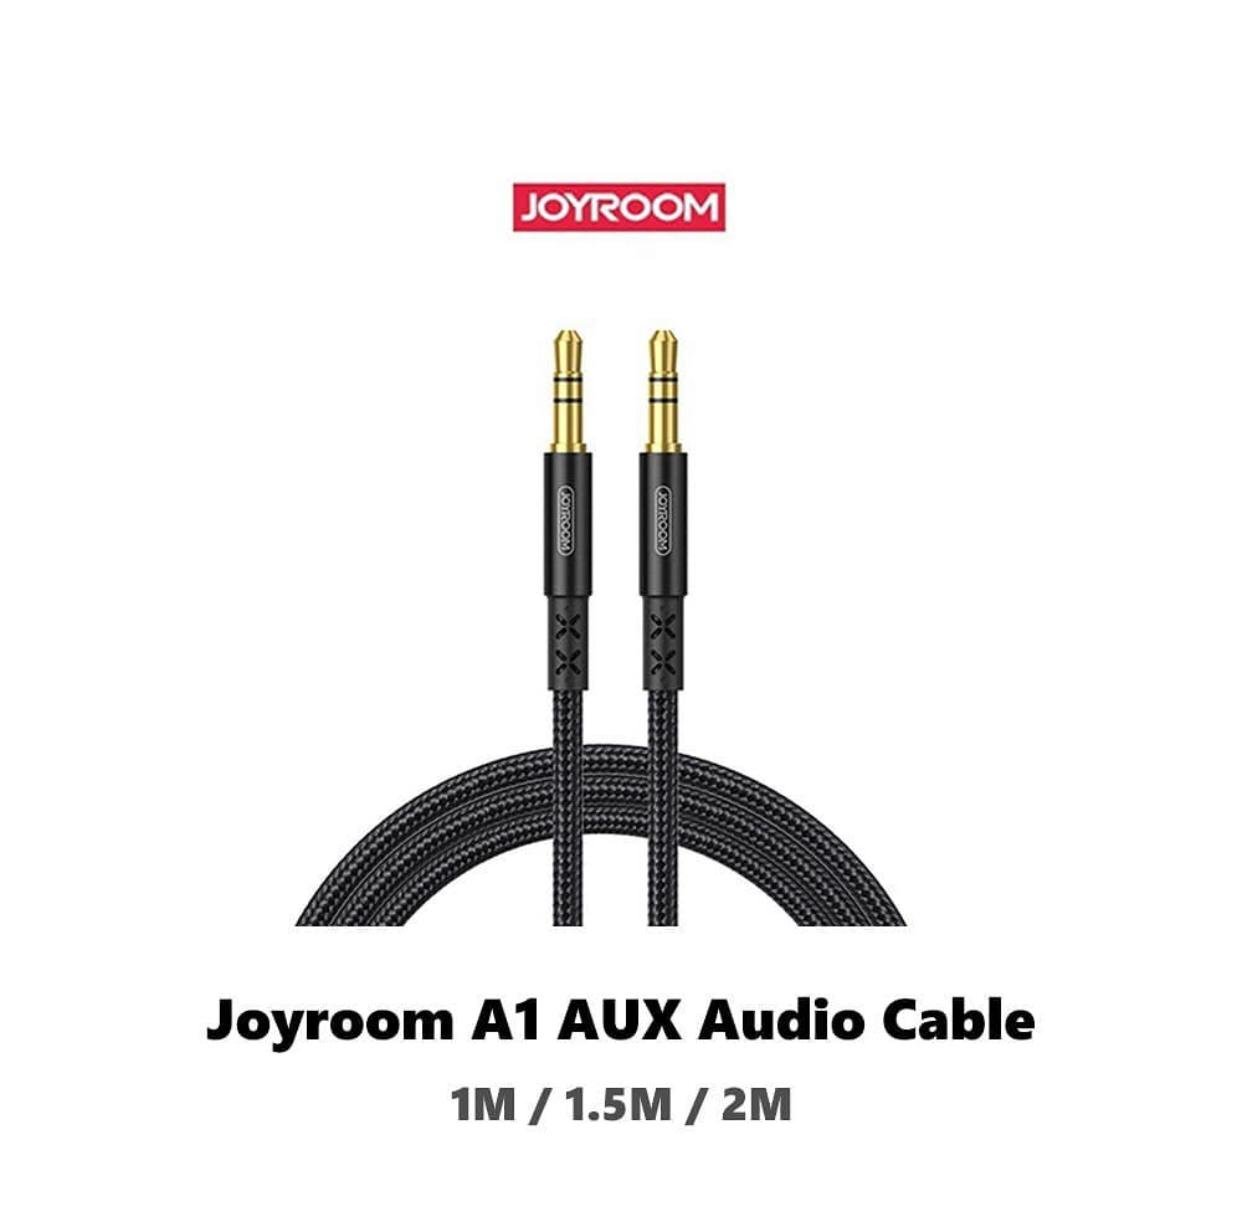 Joyroom A1 AUX 1M with 1.5M and 2M Audio Cable